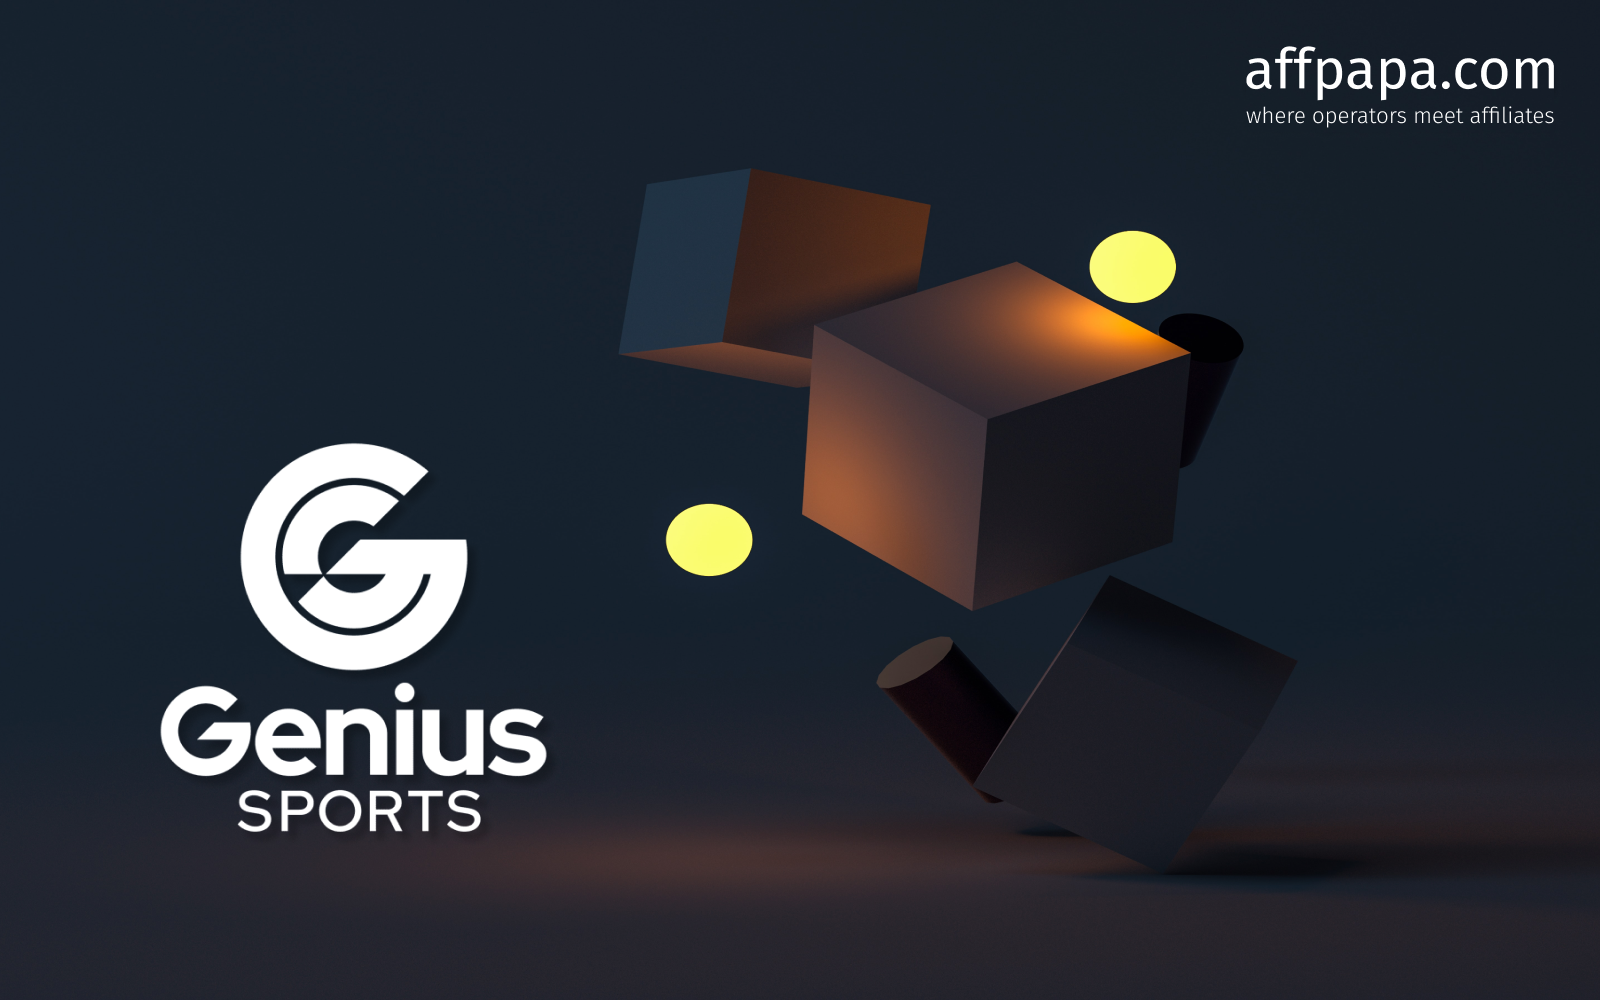 Genius Sports releases a brand-new campaign